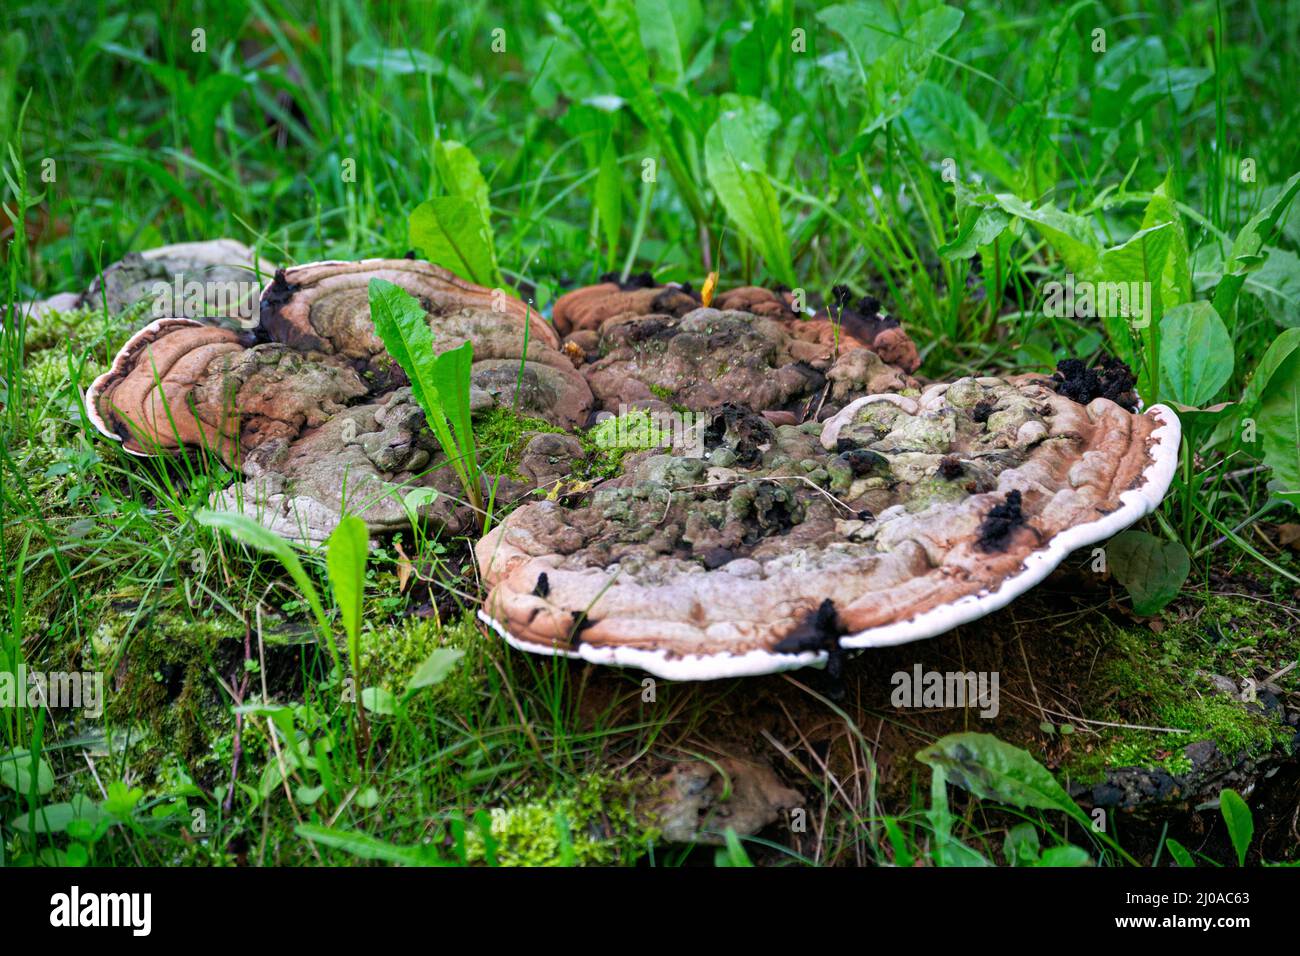 Mushroom Tinder fungus, in place of an old stump. Stock Photo